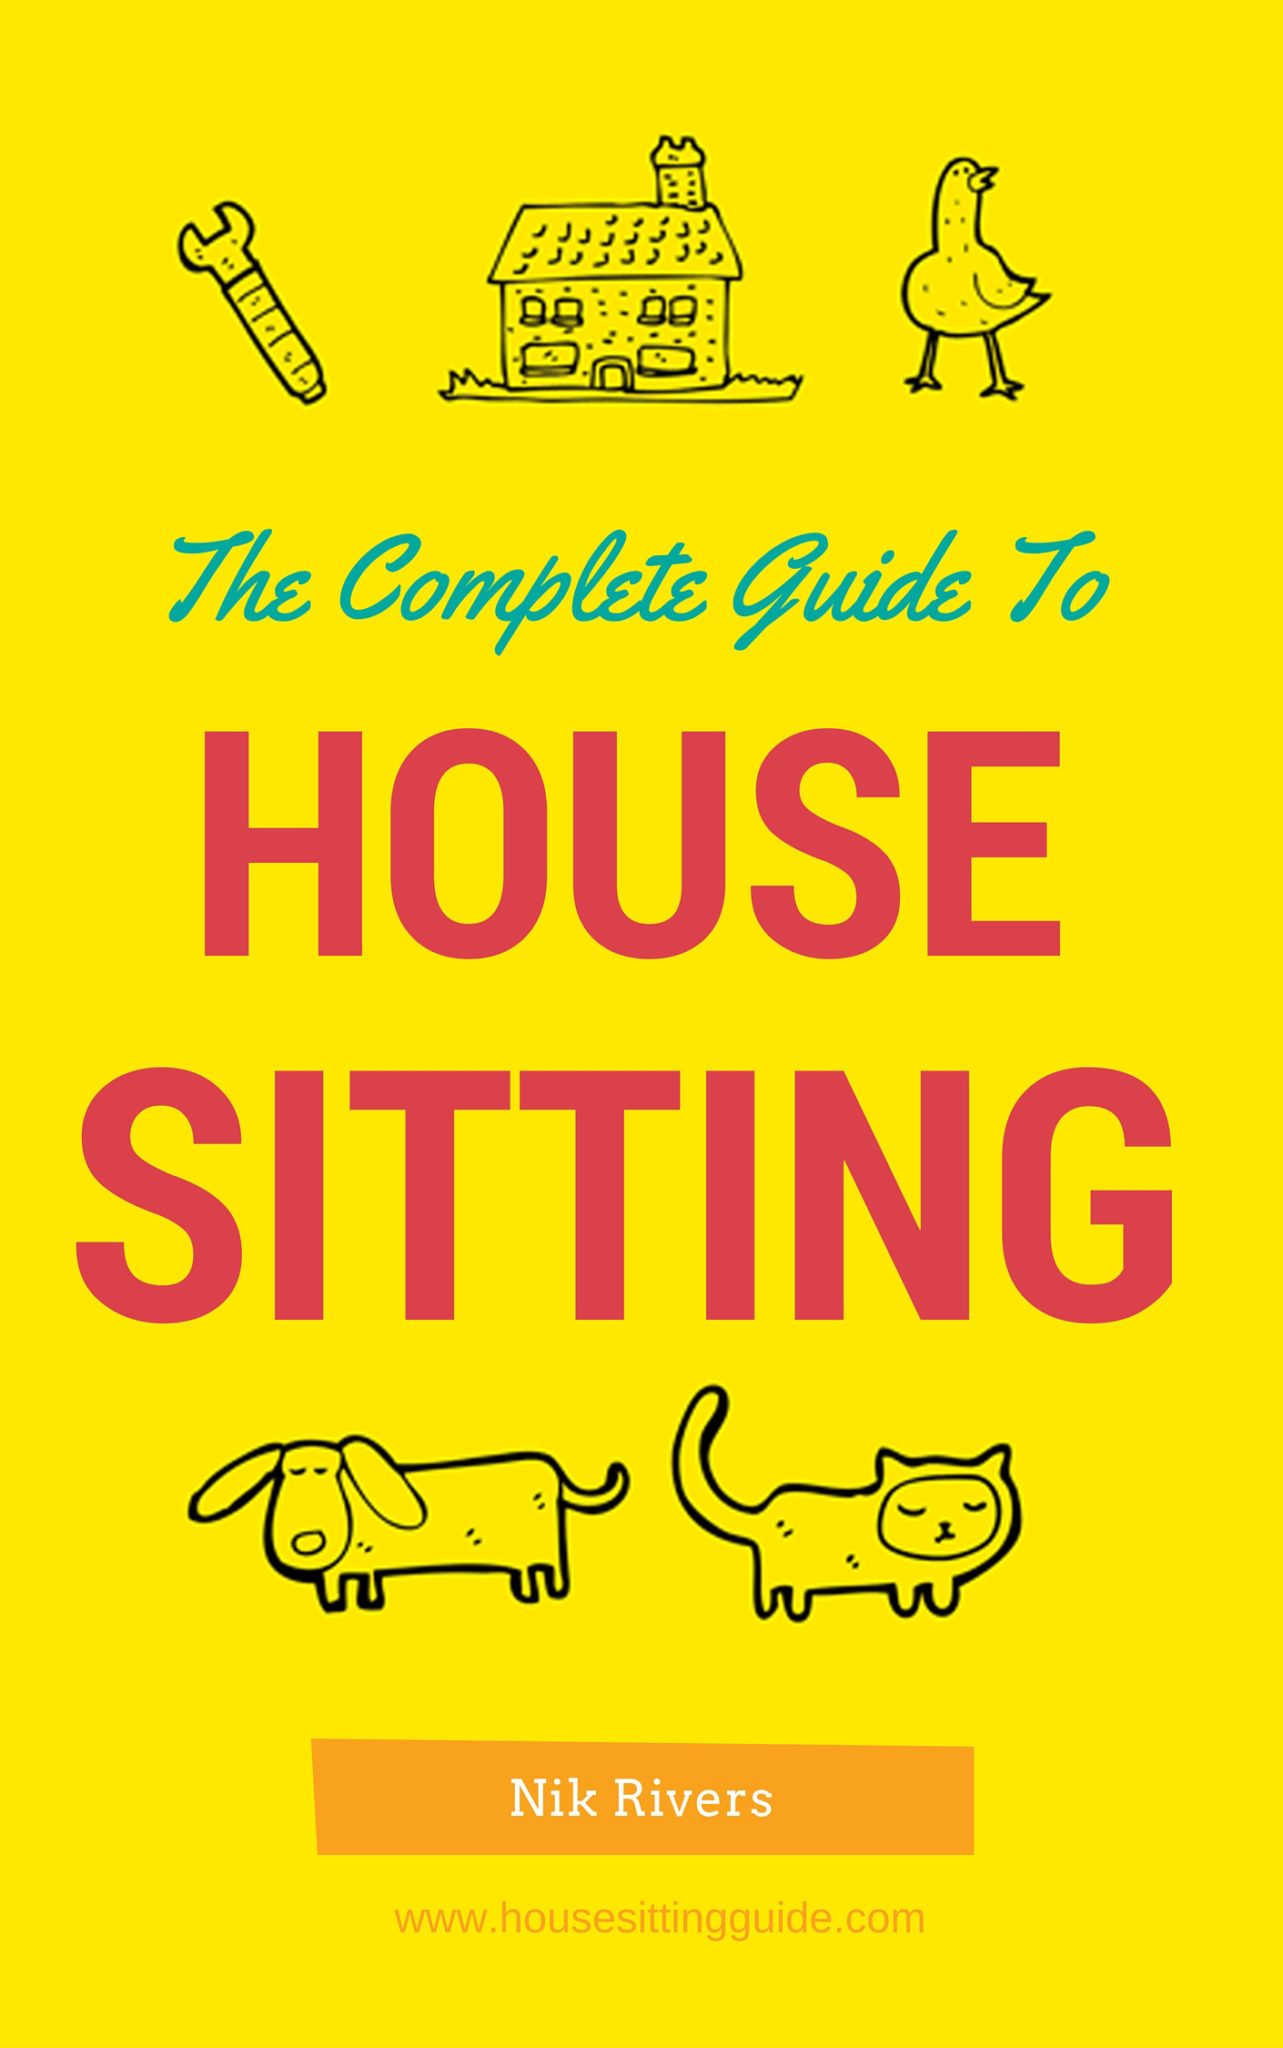 FREE: The Complete Guide to House Sitting by Nik Rivers